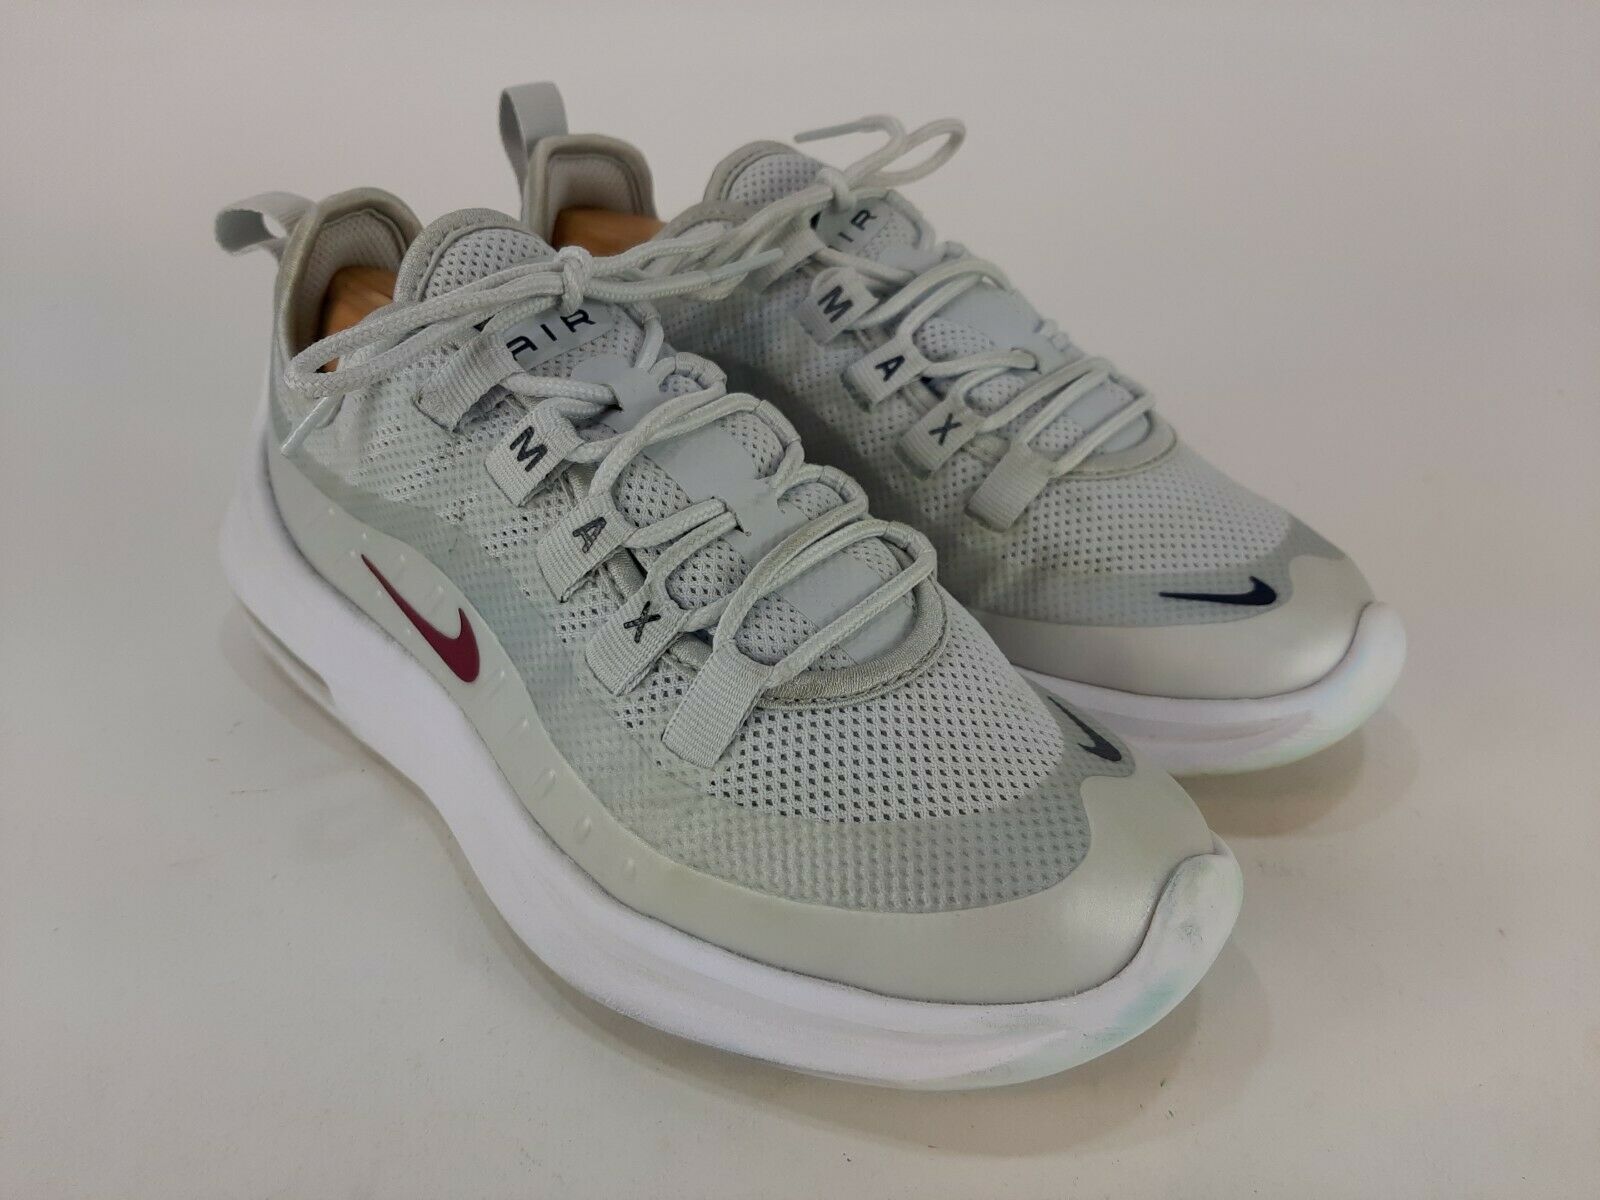 Nike Air Max Axis White & Gray Running Shoes Womens Size 5